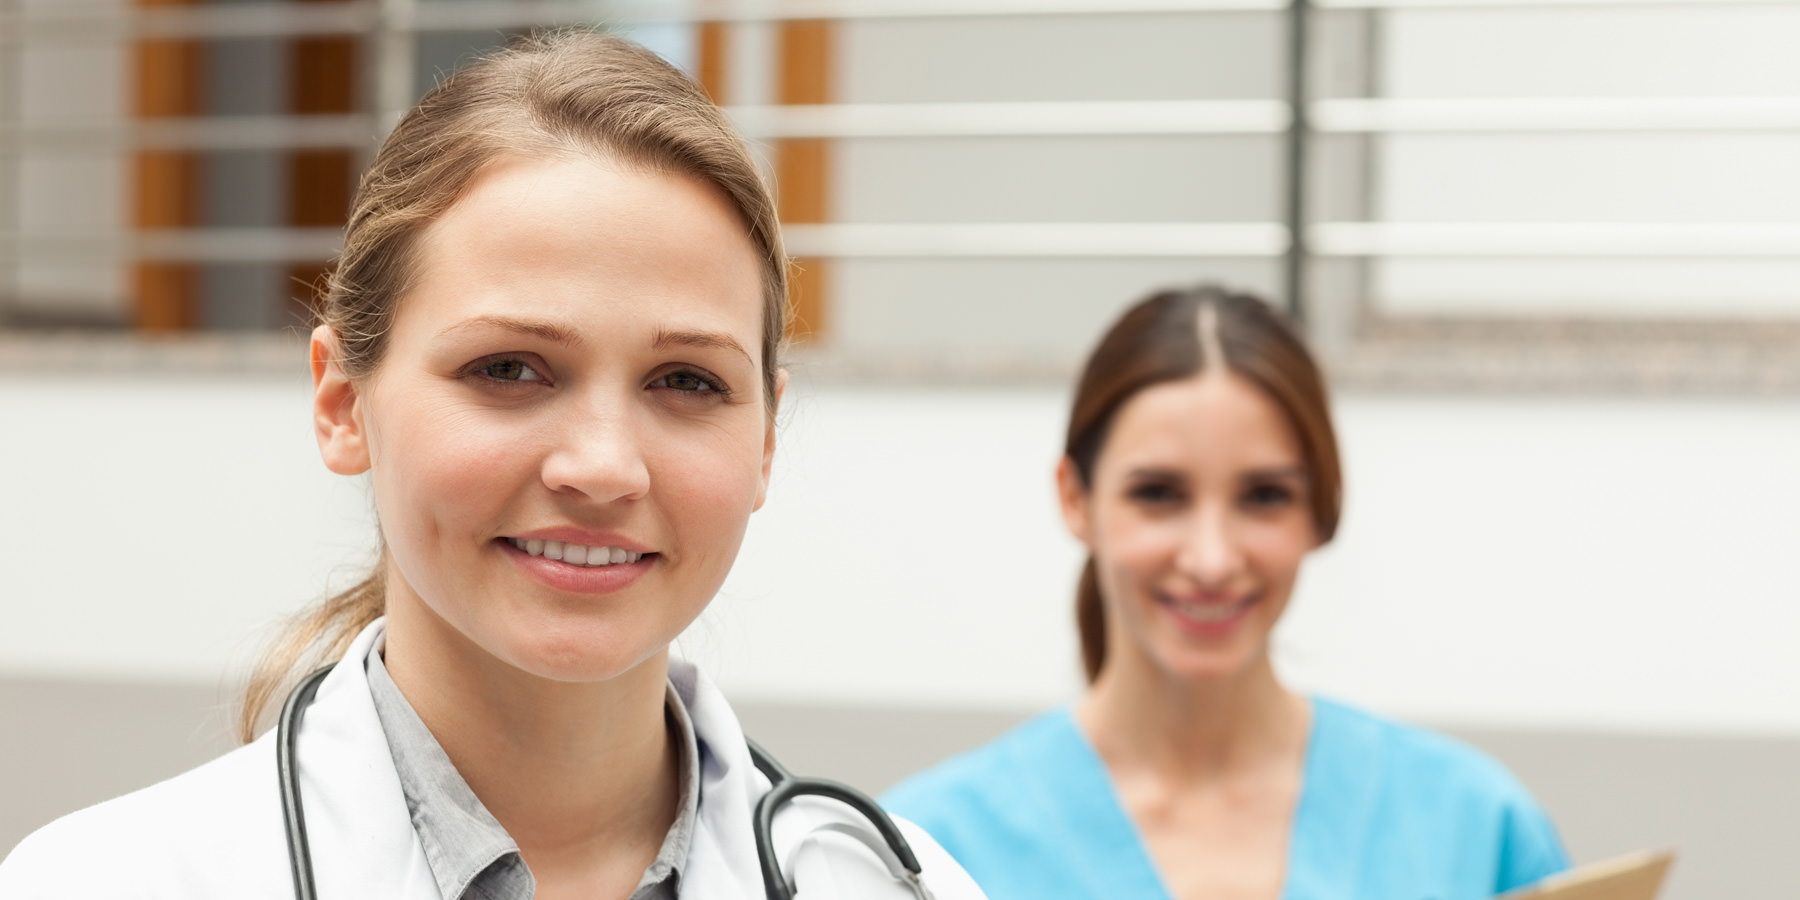 Healthcare is a key part of Passport Health's services. Join our team today!